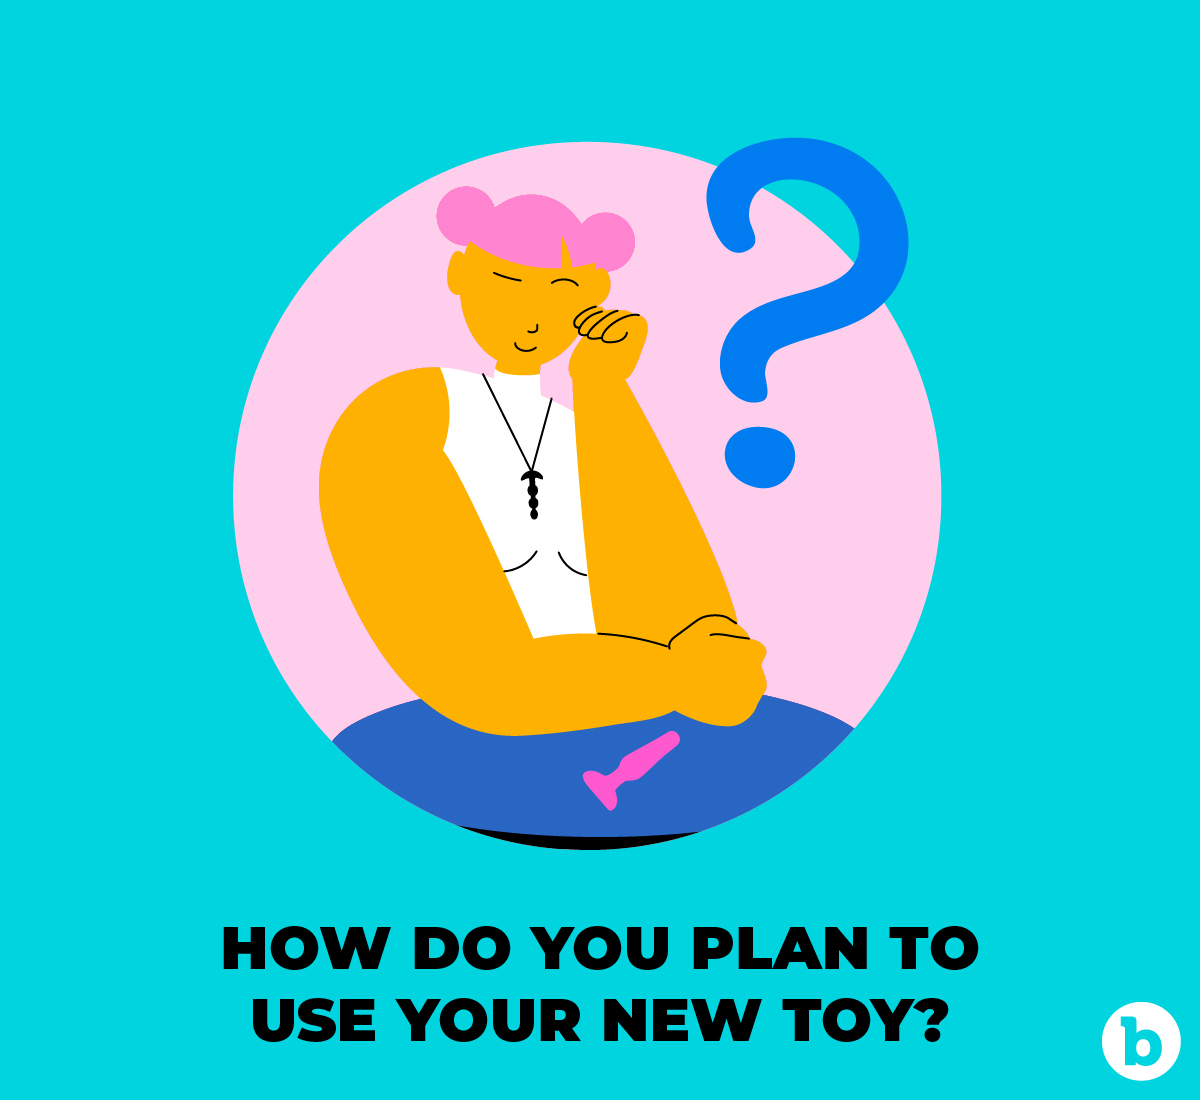 Find out how you plan to use your butt toy before purchasing it